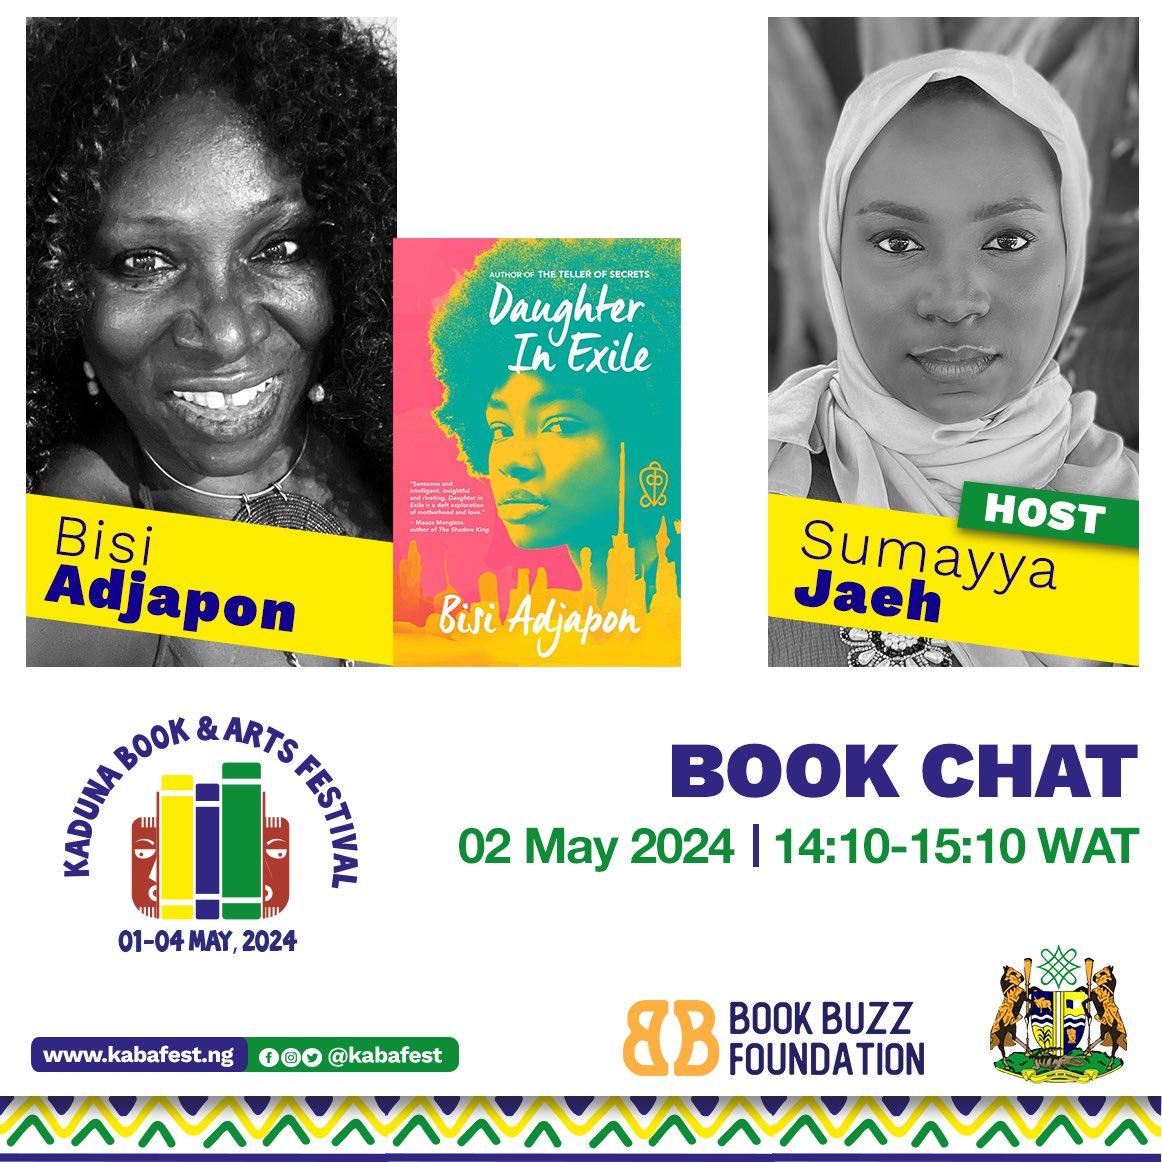 Happening Now: Book Chat ‘Daughter in Exile’ with author @bisiadjapon moderated by @SumayyaJaeh Watch live on youtube here 👇 youtube.com/live/JaiA7fPEW… #Kabafest #Kabafest24